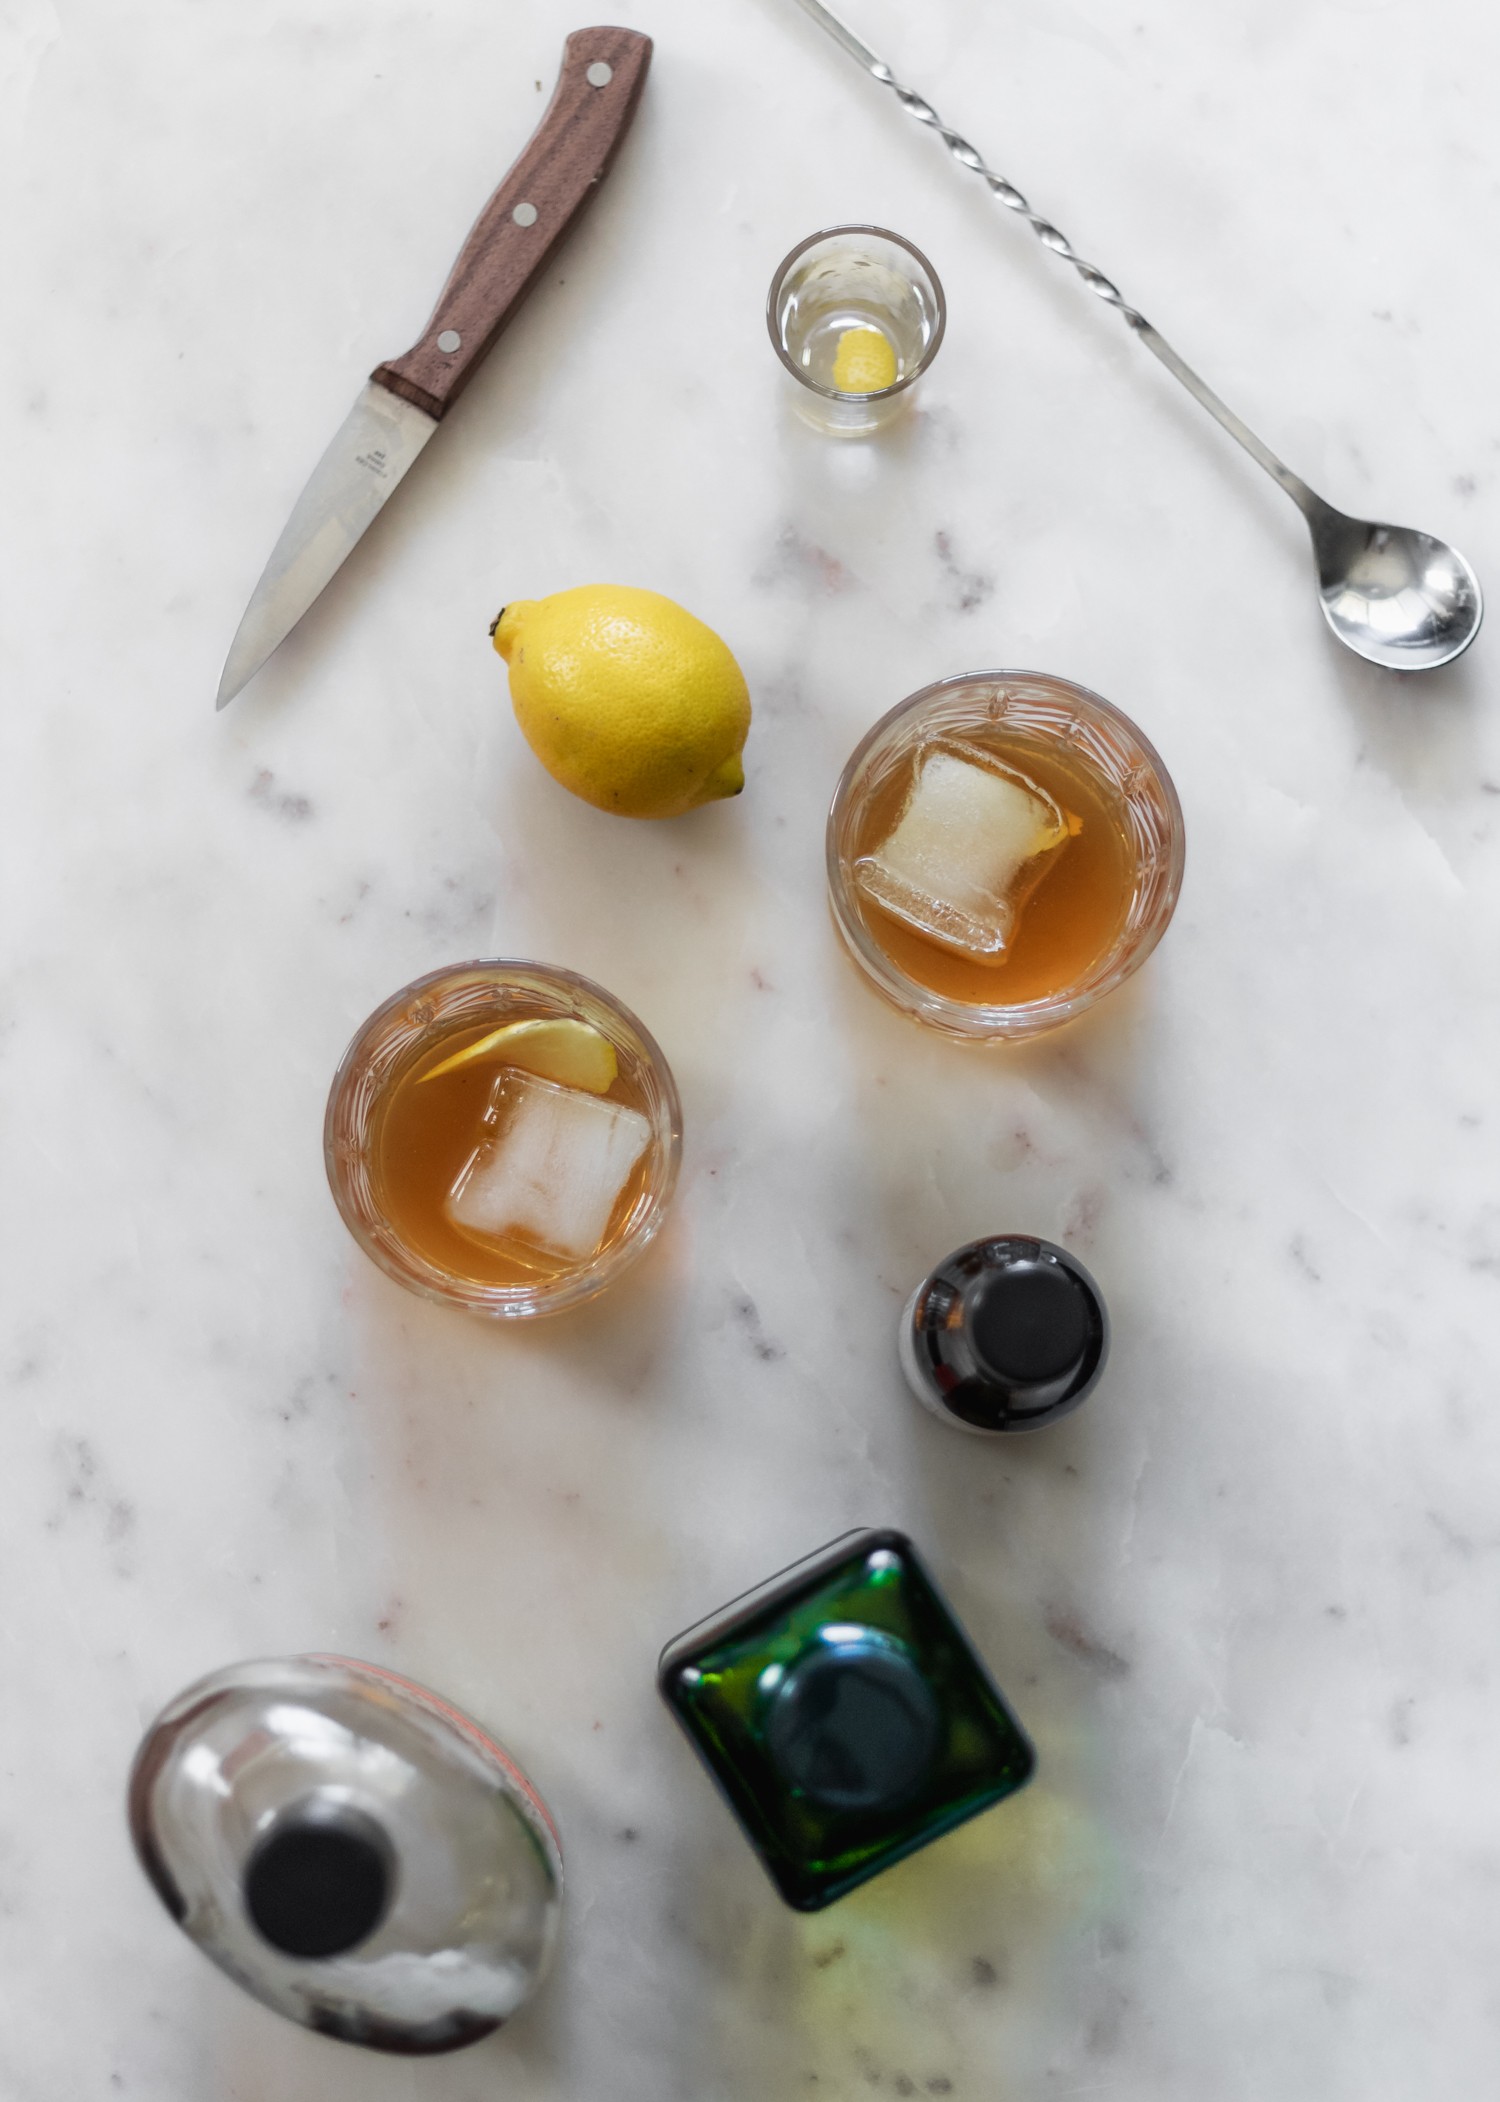 An overhead image of two ginger old fashioneds on a marble counter next to a lemon, bar spoon, green bottle, and bottle of bitters.